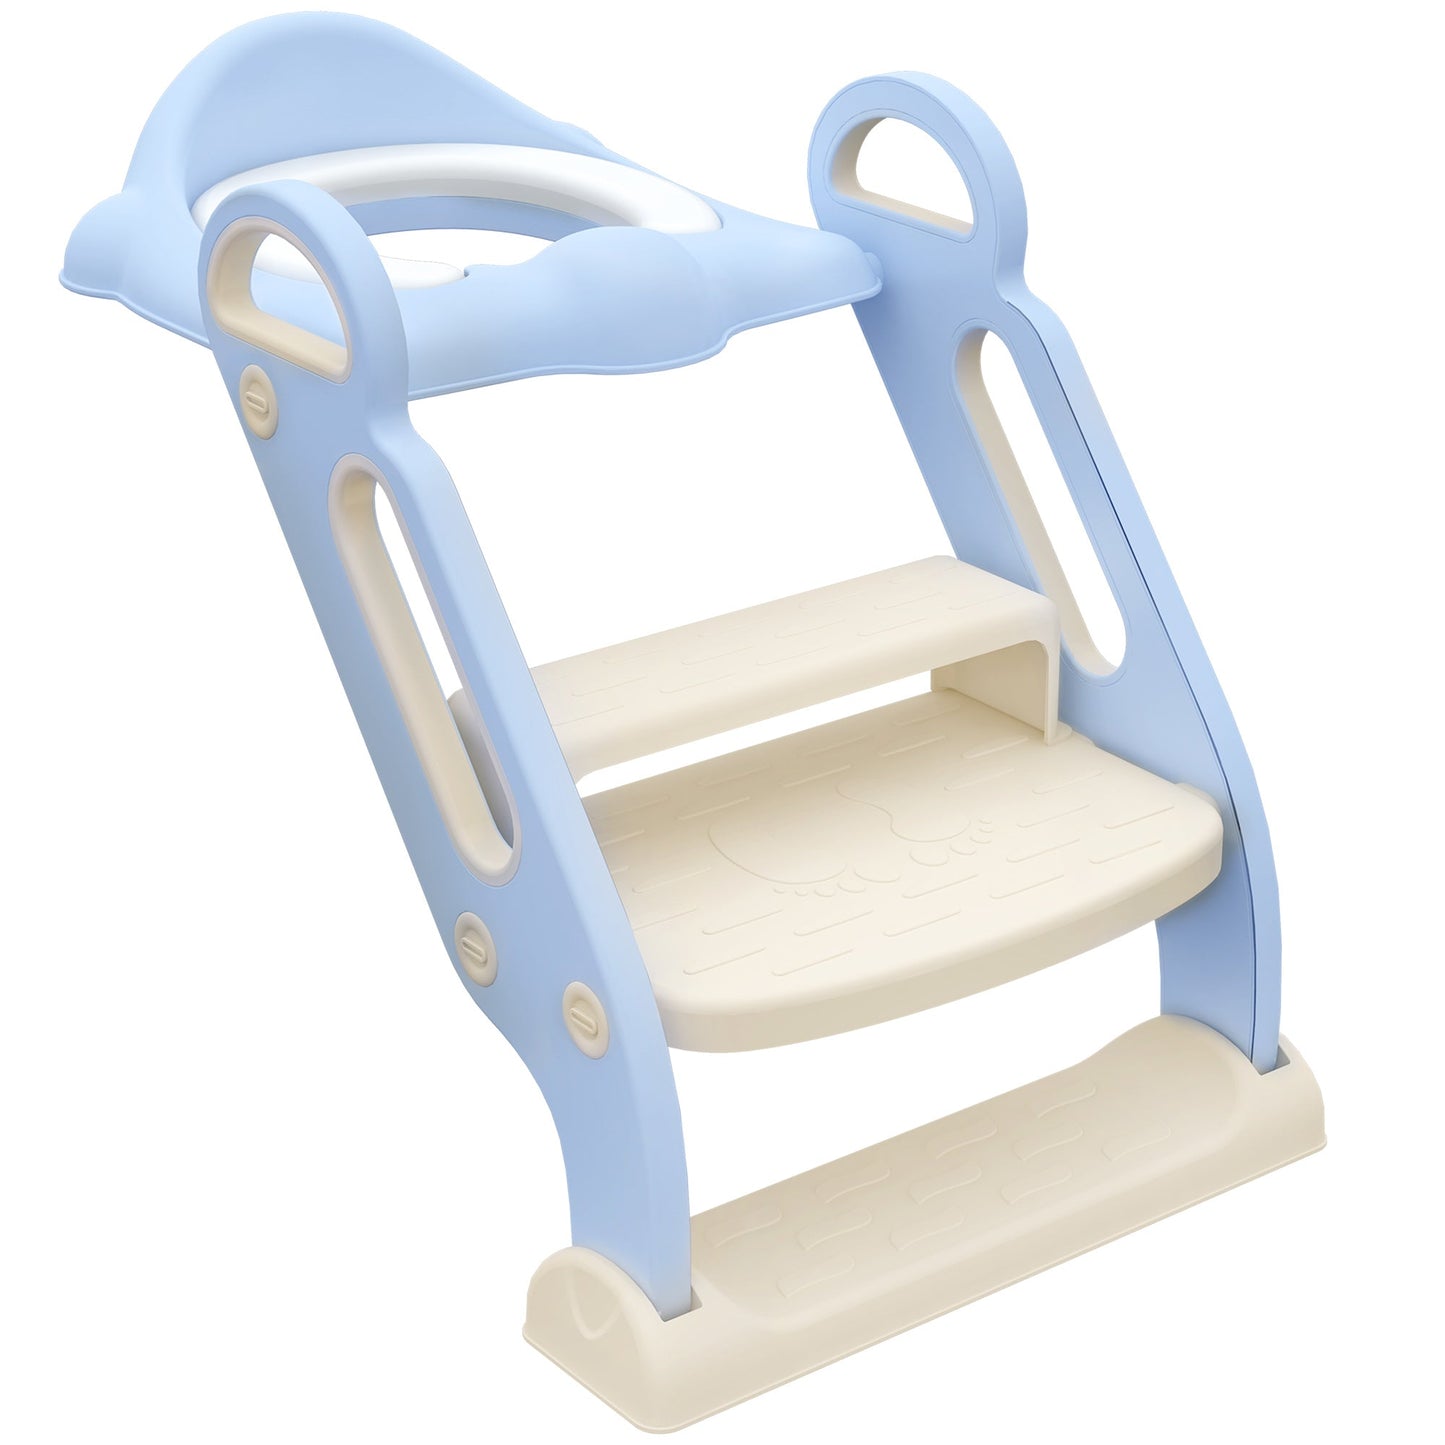 Potty Training Toilet Seat with Step Stool Ladder, Children Toilet Training Seat Chair with Soft Cushion, Handles, Non-Slip Wide Steps, Splash Guard, for Boys and Girls, Blue at Gallery Canada